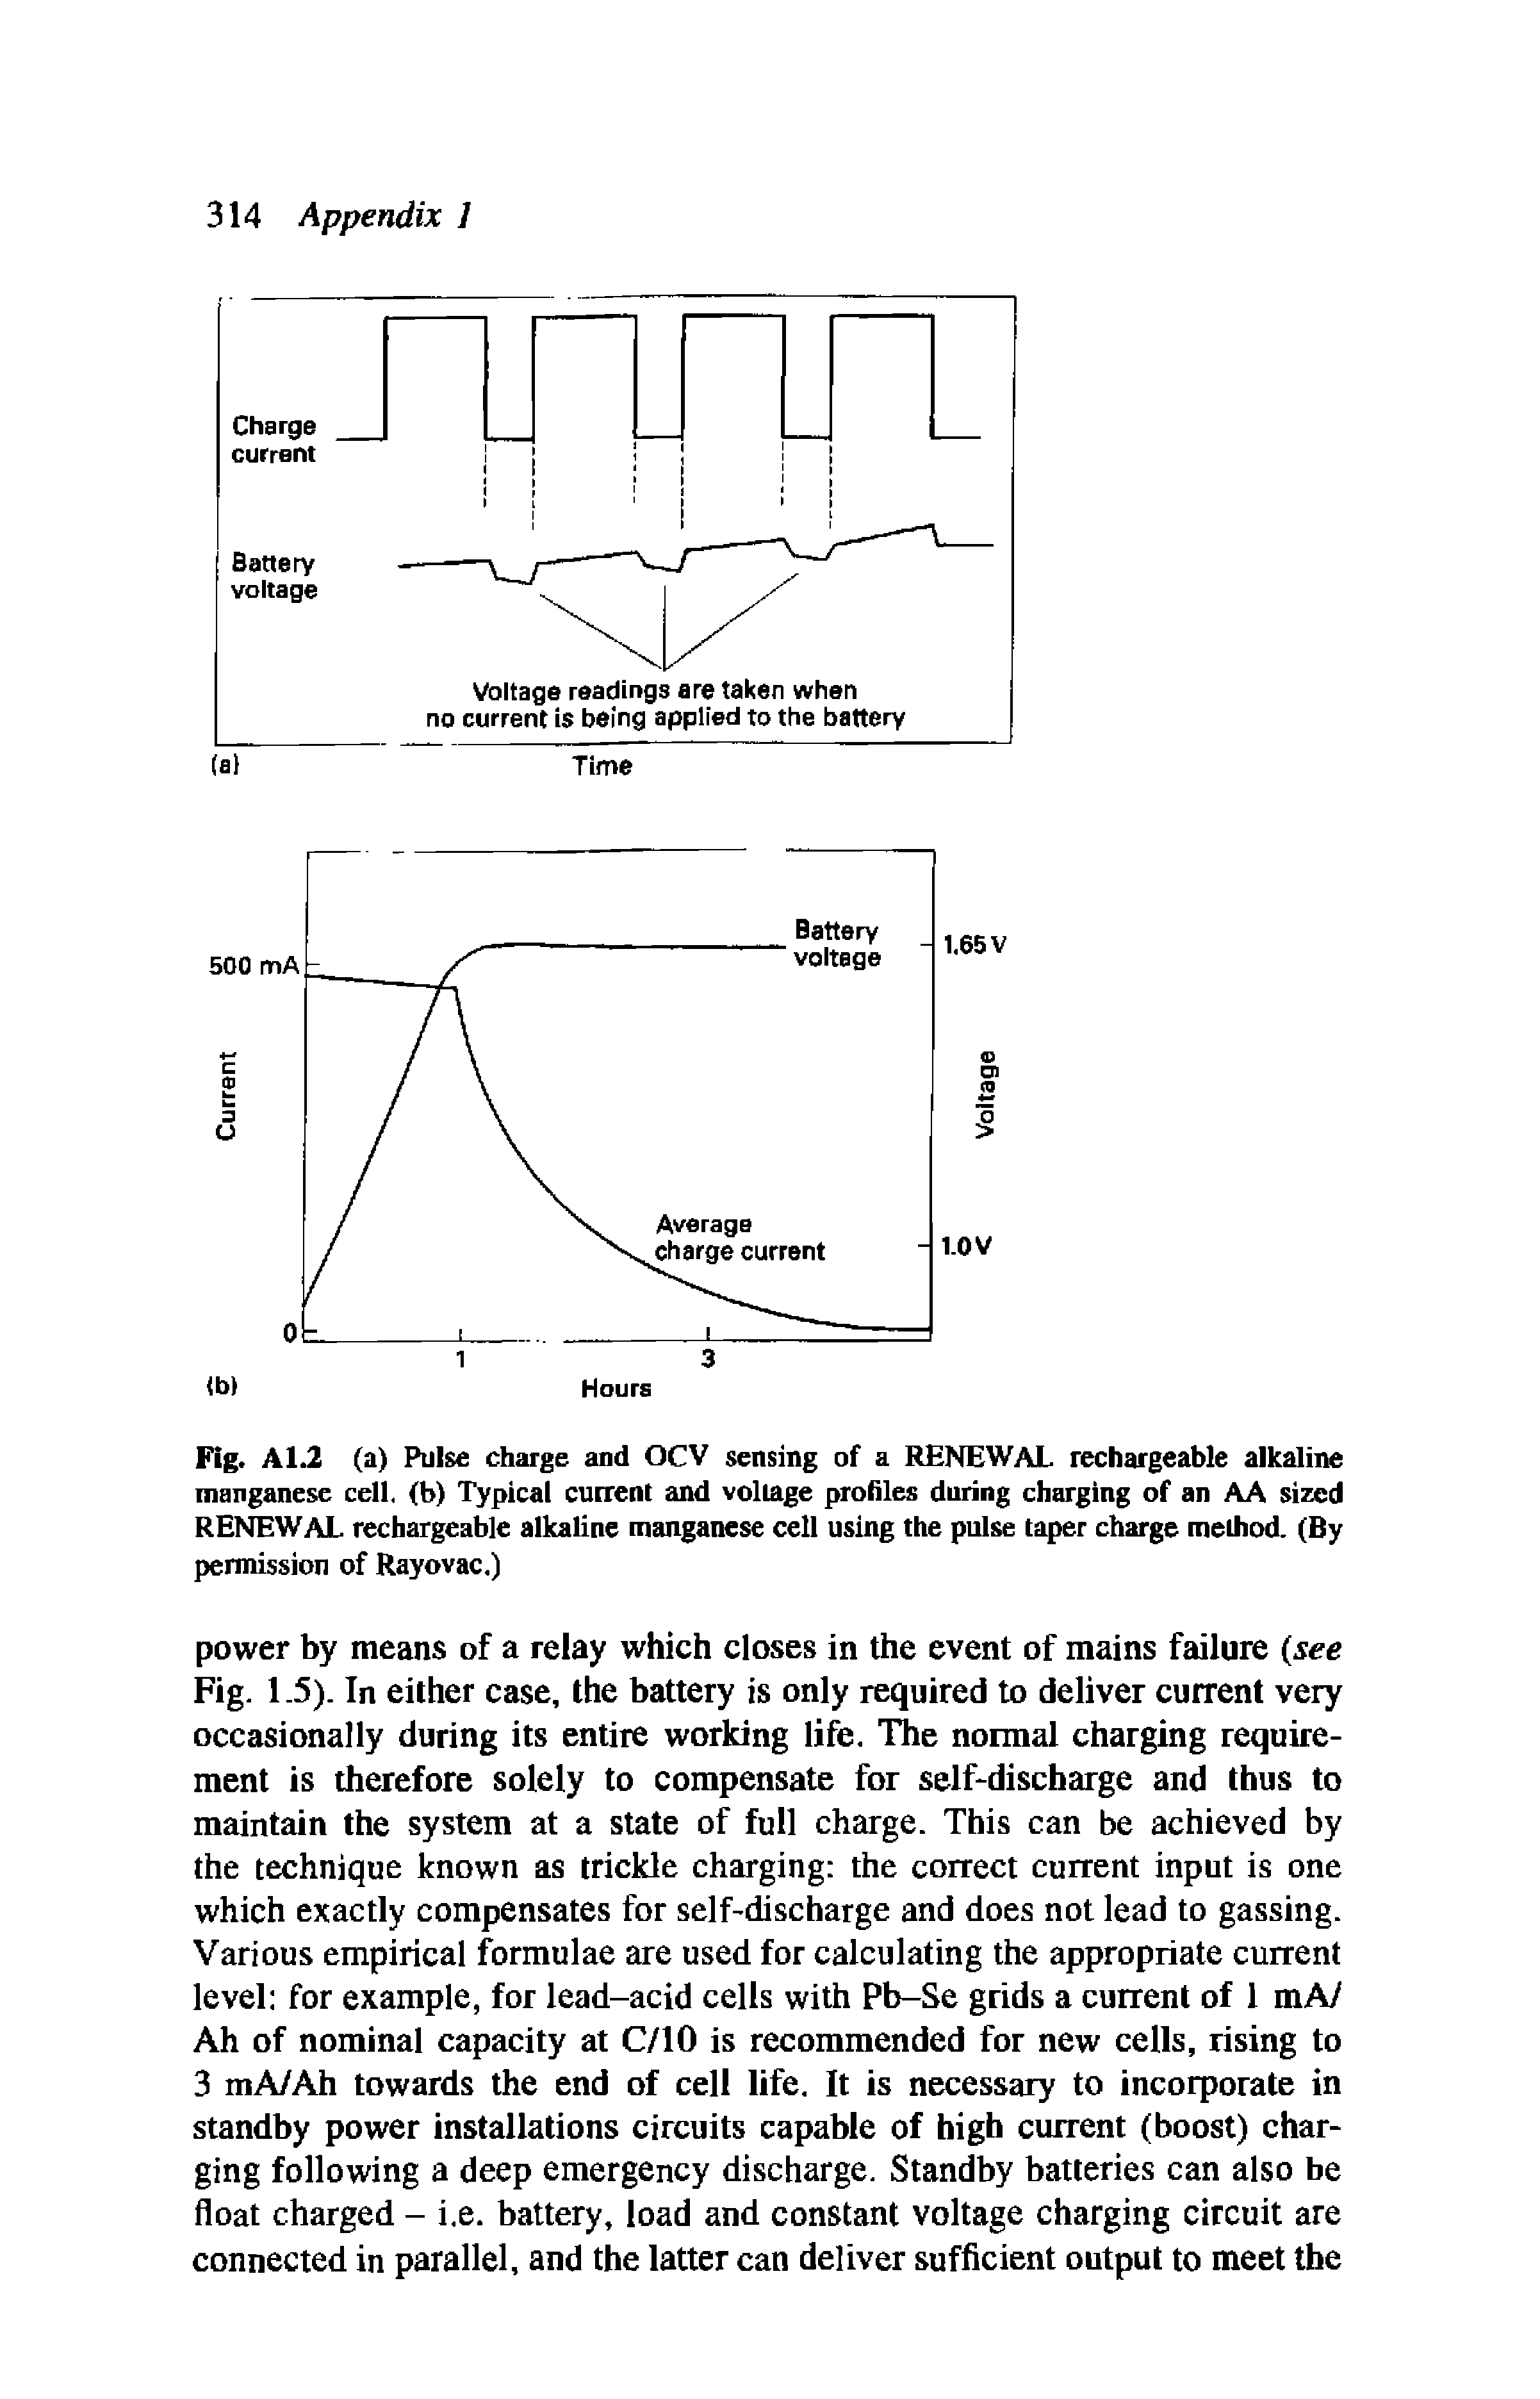 Fig. A 1.2 (a) Pulse charge and OCV sensing of a RENEWAL rechargeable alkaline manganese cell, (b) Typical current and voltage profiles during charging of an AA sized RENEWAL rechargeable alkaline manganese cell using the pulse taper charge method. (By permission of Rayovac.)...